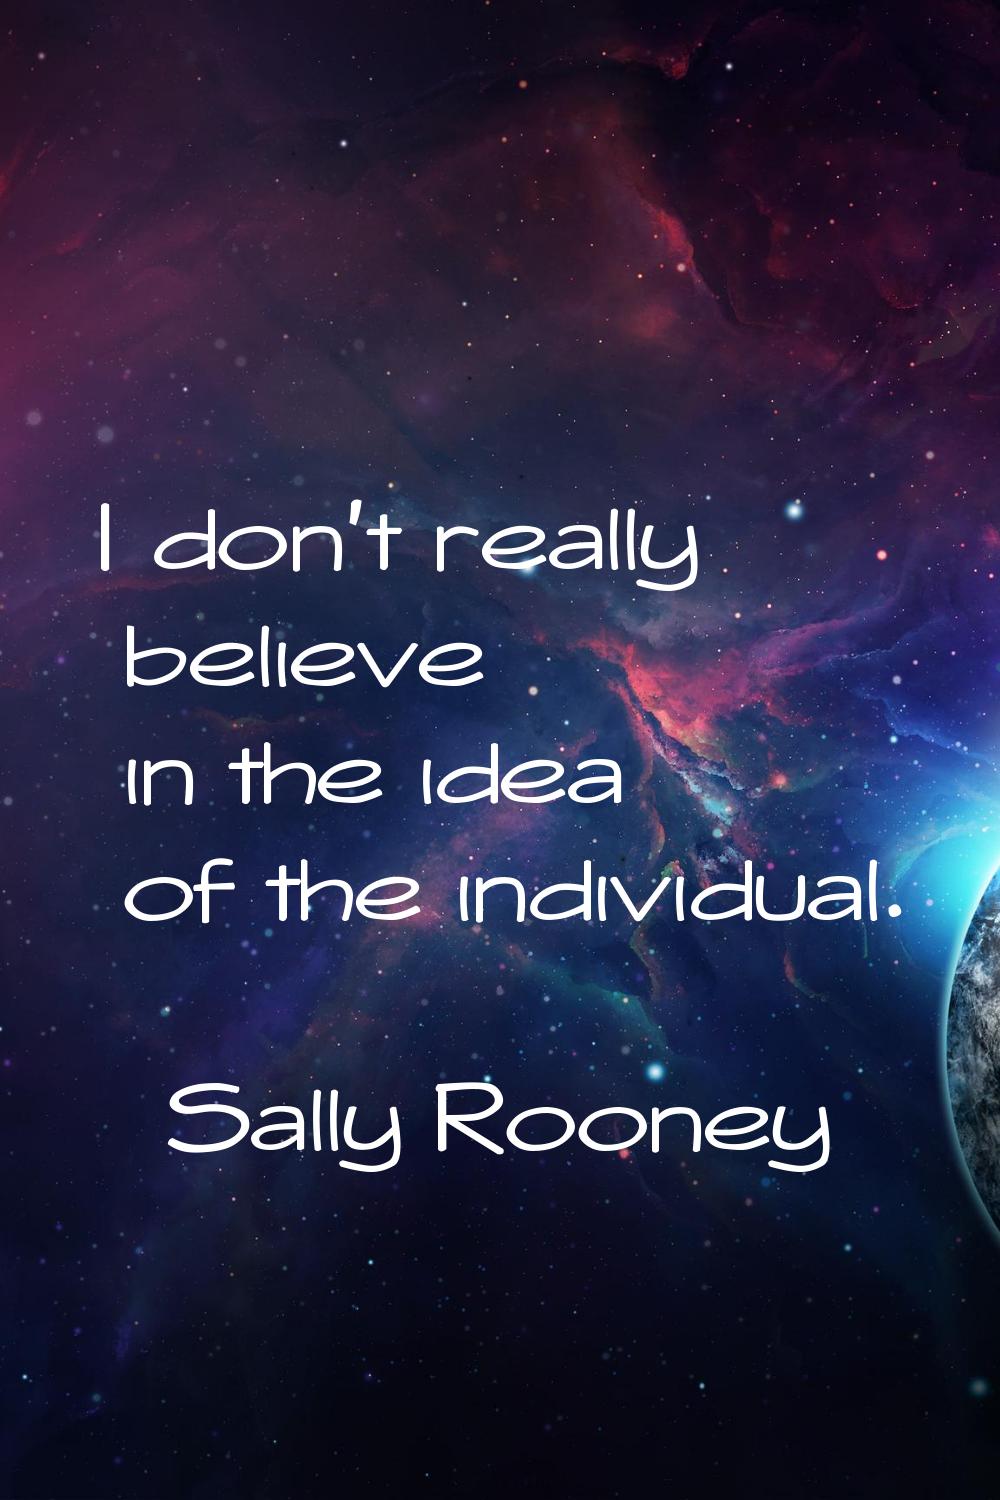 I don't really believe in the idea of the individual.